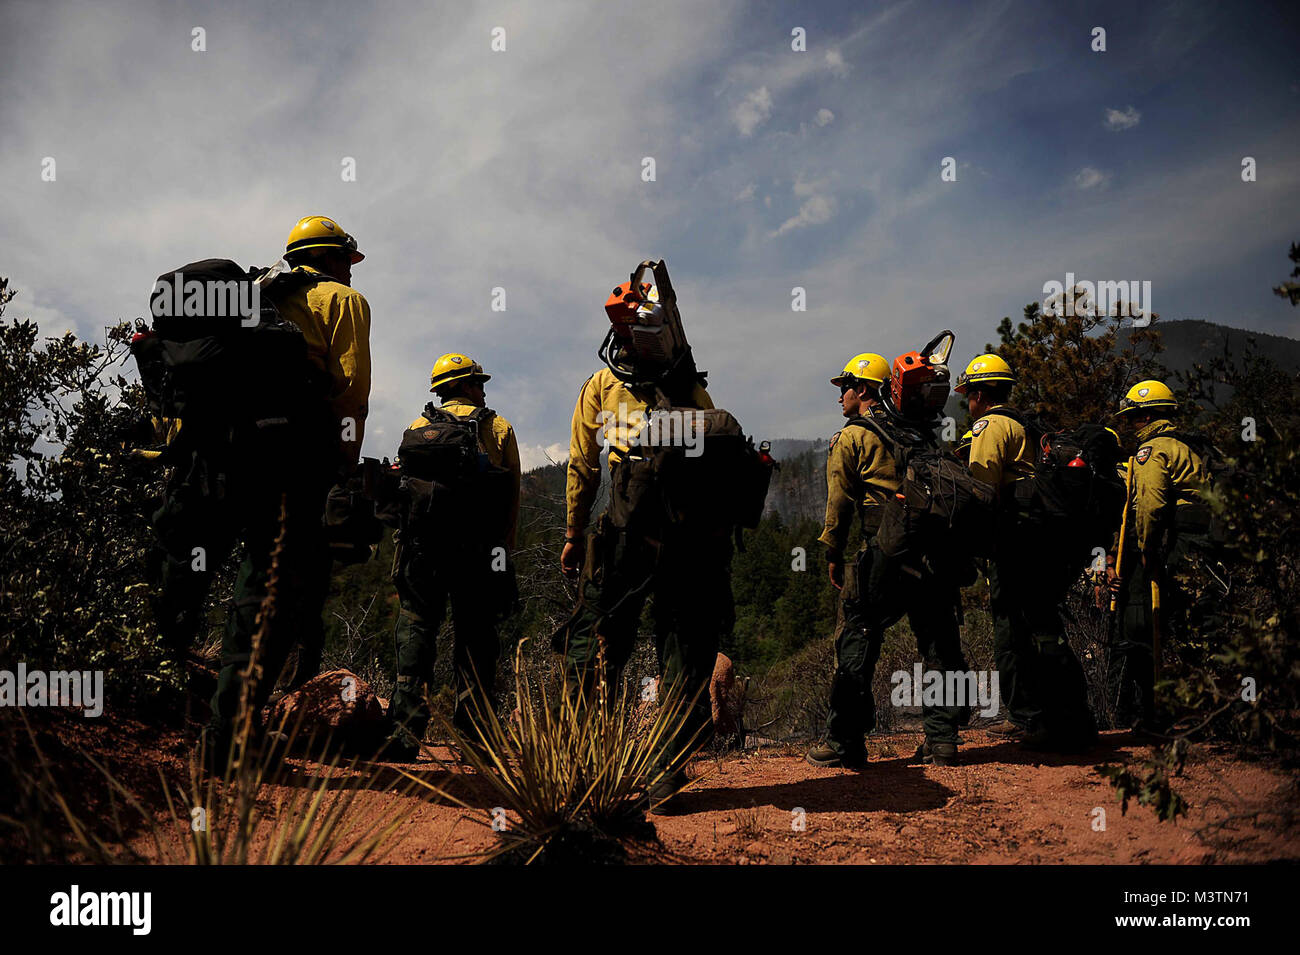 Vandenberg Air Force Base Hot Shot fire fighters prepare to cut a fire line on June 28, 2012 in the Mount Saint Francois area of Colorado Springs, Co. while helping to battle several fires in Waldo Canyon.  The Waldo Canyon fire has grown to 18,500 acres and burned over 300 homes. Currently, more than 90 firefighters from the Academy, along with assets from Air Force Space Command; F.E. Warren Air Force Base, Wyo.; Fort Carson, Colo.; and the local community continue to fight the Waldo Canyon fire.(U.S. Air Force Photo by: Master Sgt. Jeremy Lock) (Released) 120628-F-JQ435-032 by AirmanMagazin Stock Photo